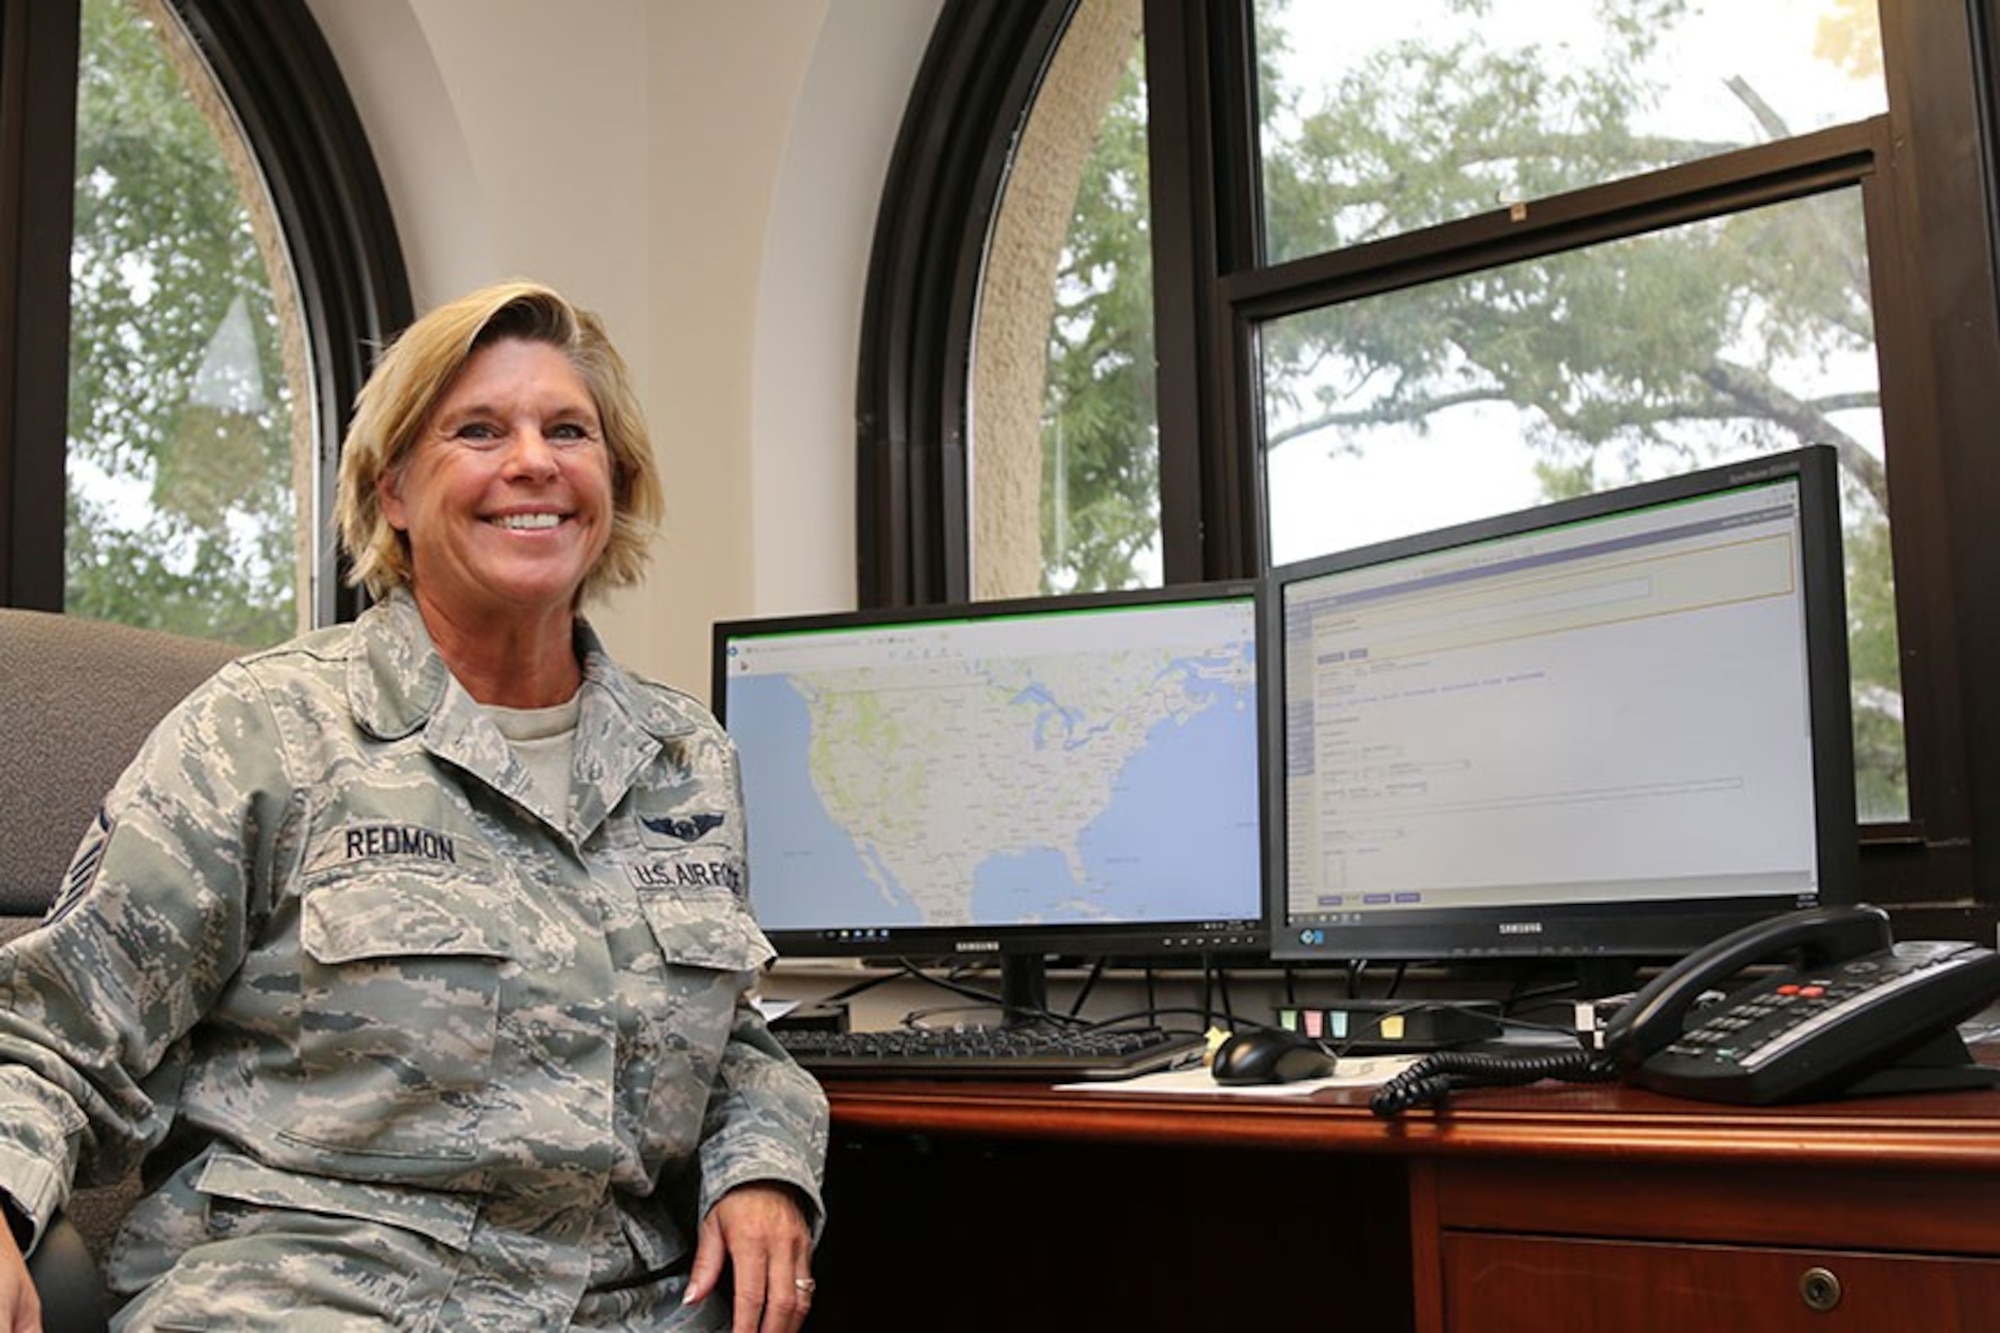 Master Sgt. Kristen Redmon, a Tyndall Air Force Base civilian reservist, works in a temporary office at Maxwell Air Force Base overlooking the National Operations Center at Civil Air Patrol National Headquarters. Redmon relocated to Maxwell AFB, Ala., before Hurricane Michael hit the Tyndall AFB area. (Civil Air Patrol photo by Susan Schneider)